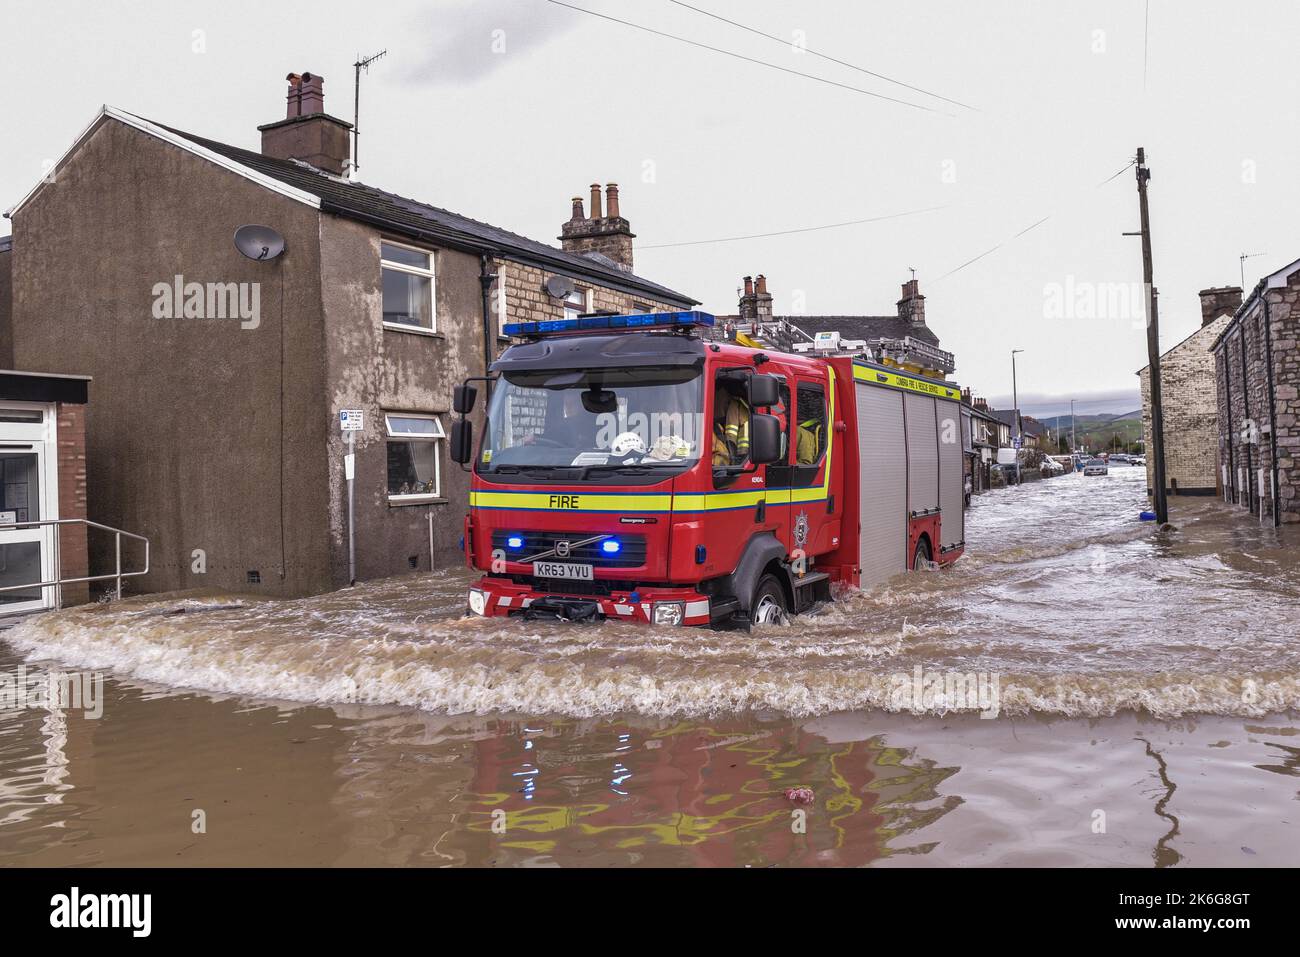 Kendal, Cumbria - December 6th 2015 - A fire engine battles through major flooding in Kendal, Cumbria on the 6th of December 2015 after Storm Desmond. Pic Credit: Scott CM/Alamy Live News Stock Photo